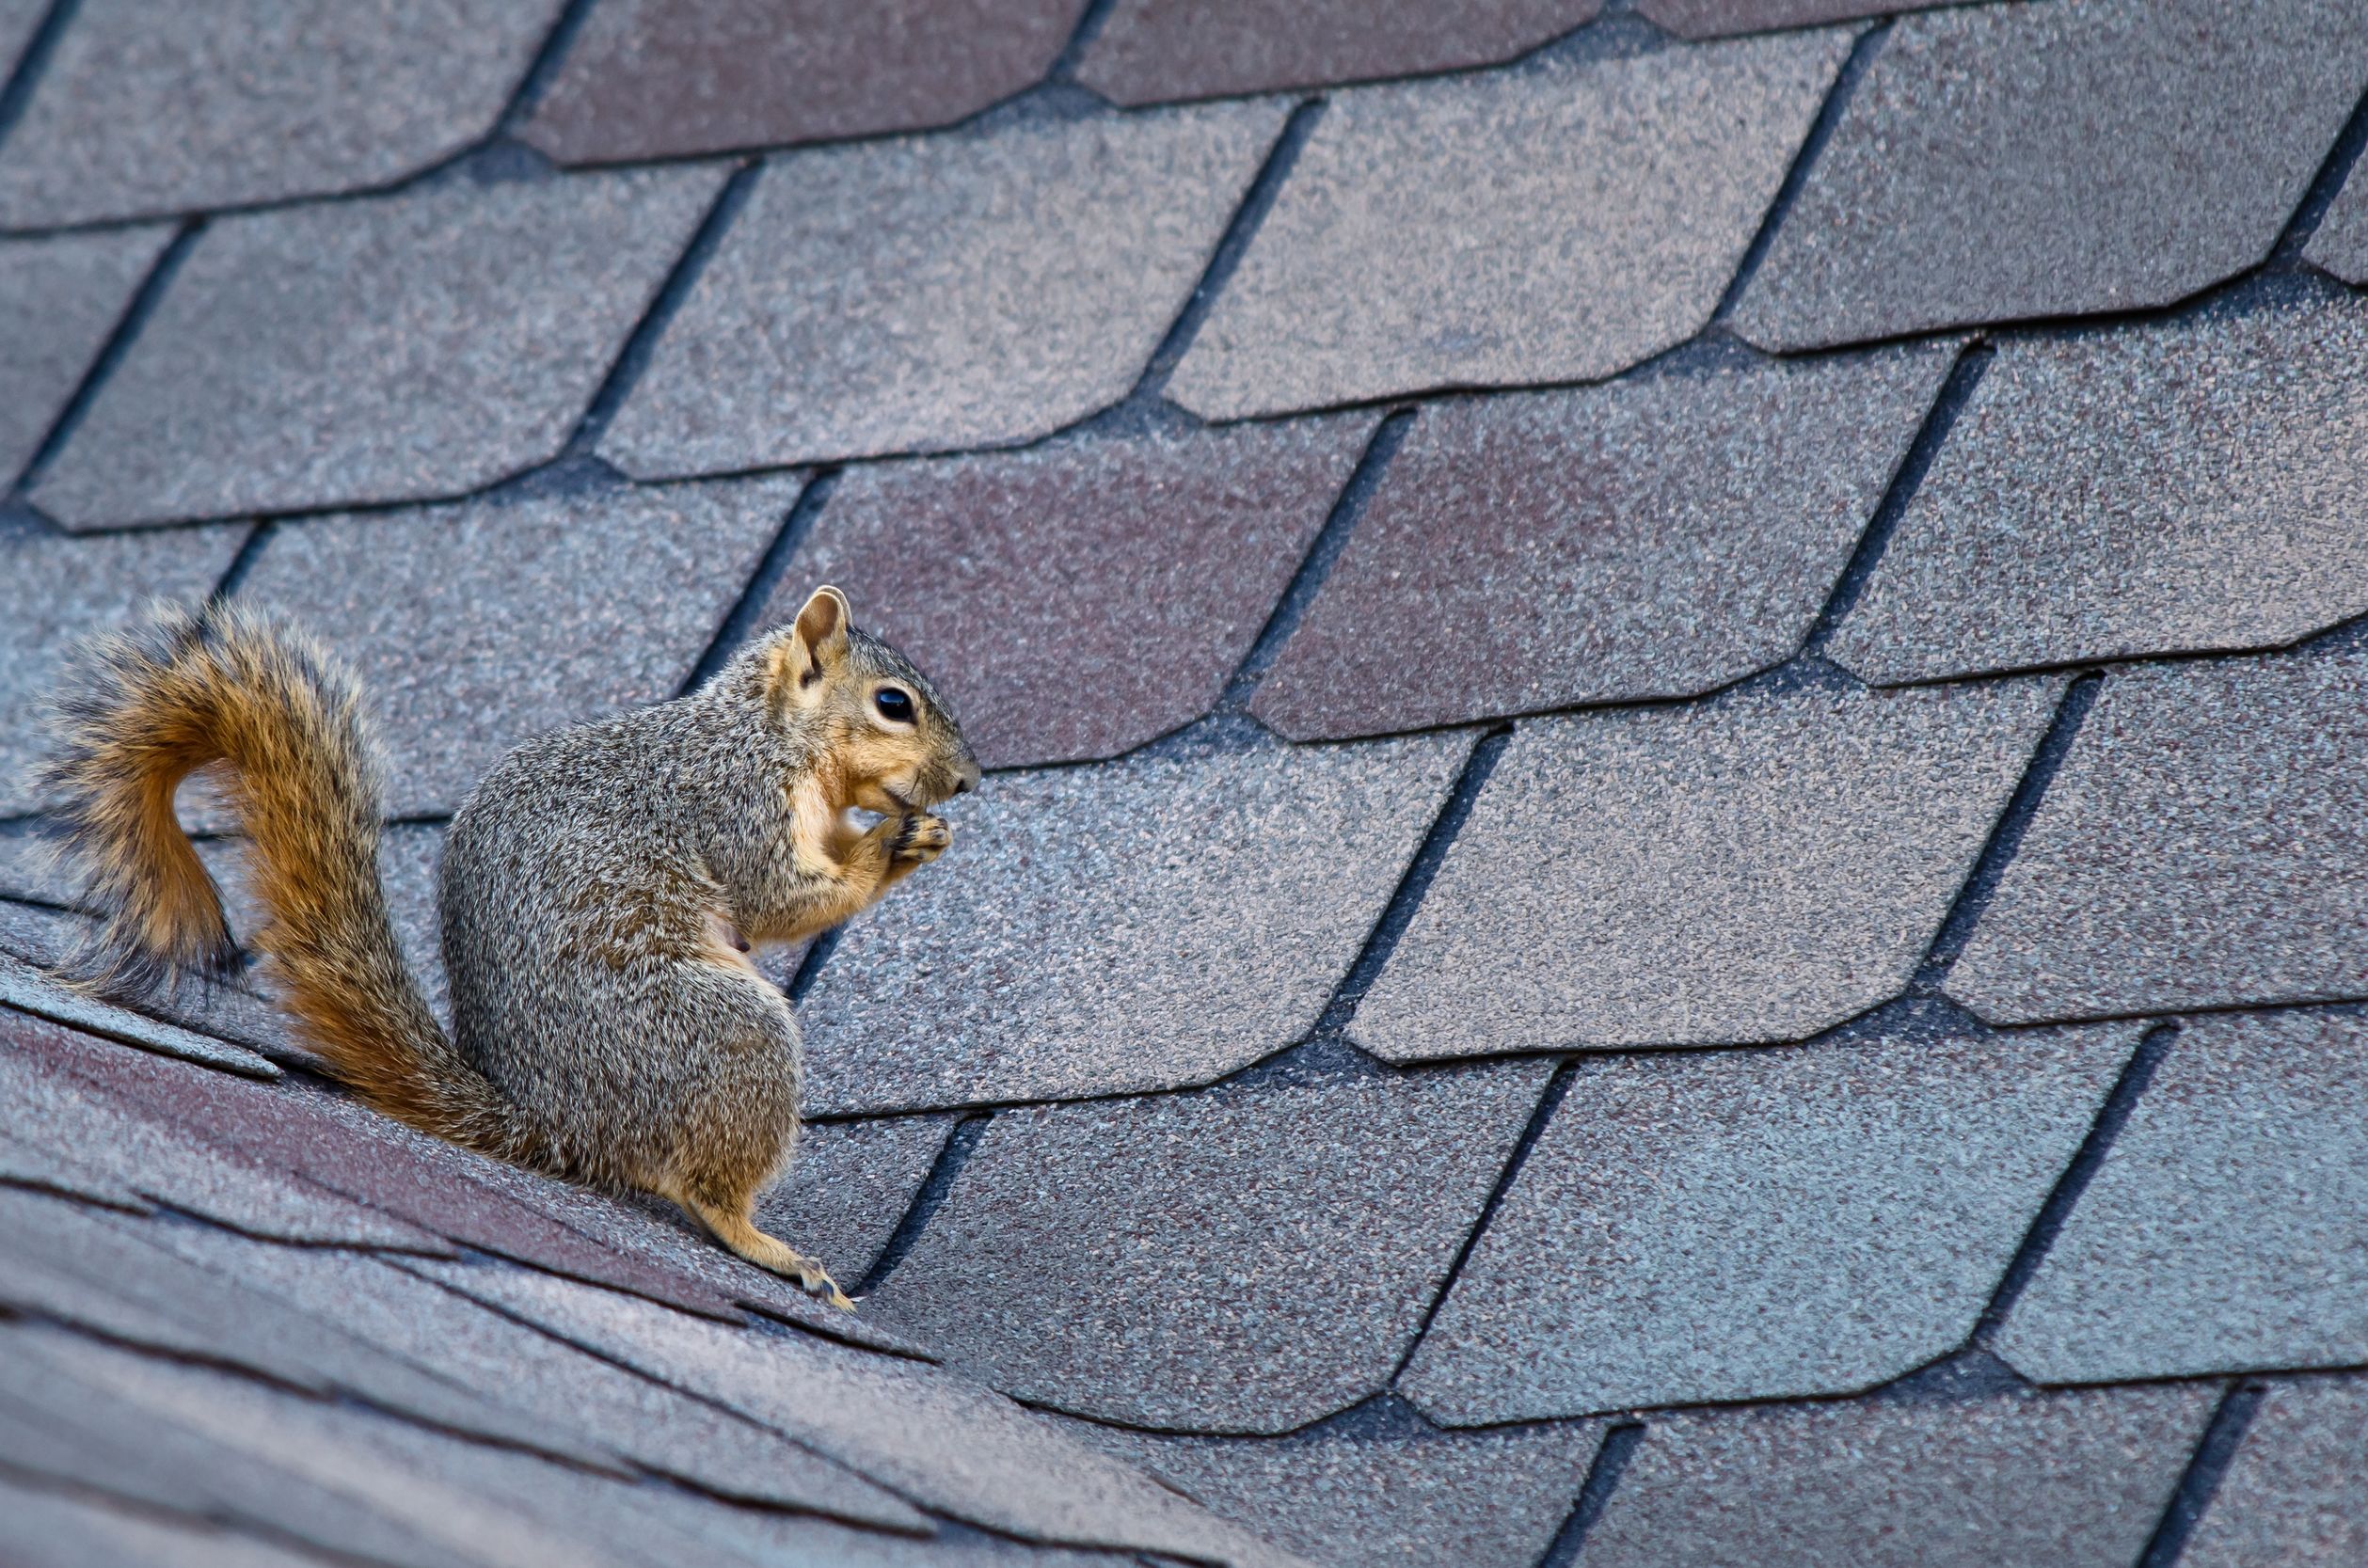 BPCA provides new guide for social housing providers on grey squirrel problem